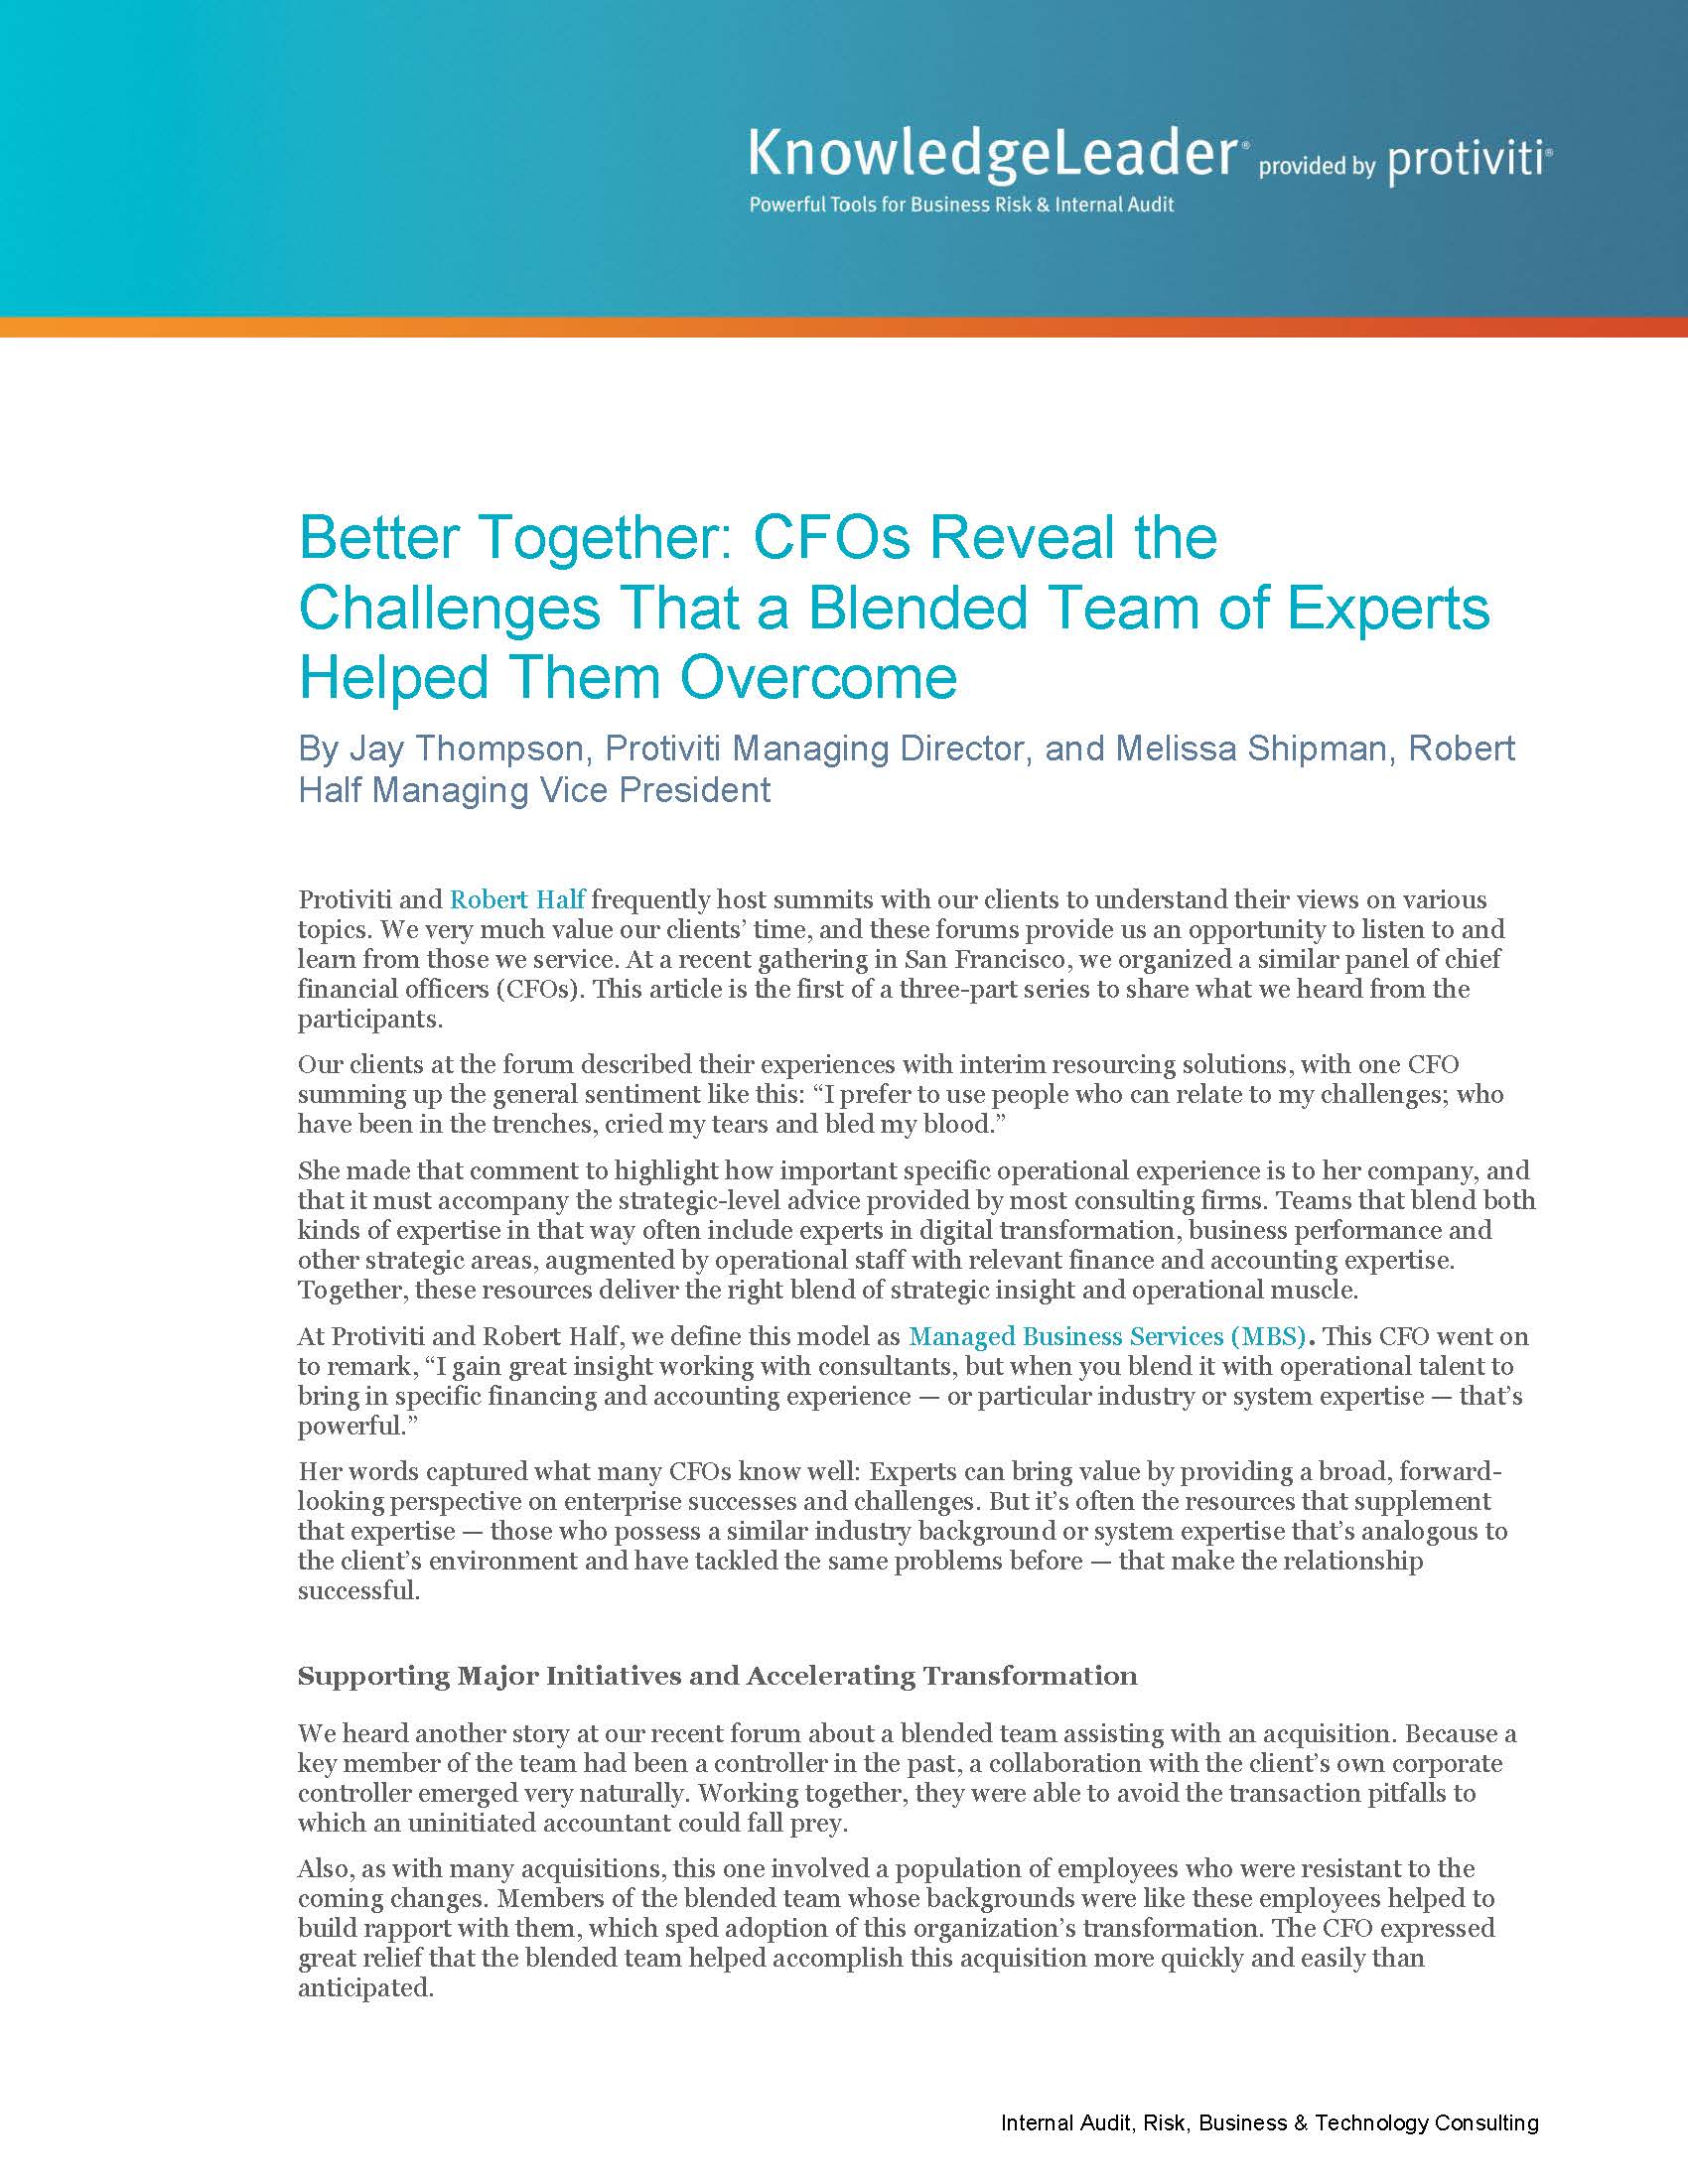 Screenshot of the first page of Better Together CFOs Reveal the Challenges That a Blended Team of Experts Helped Them Overcome